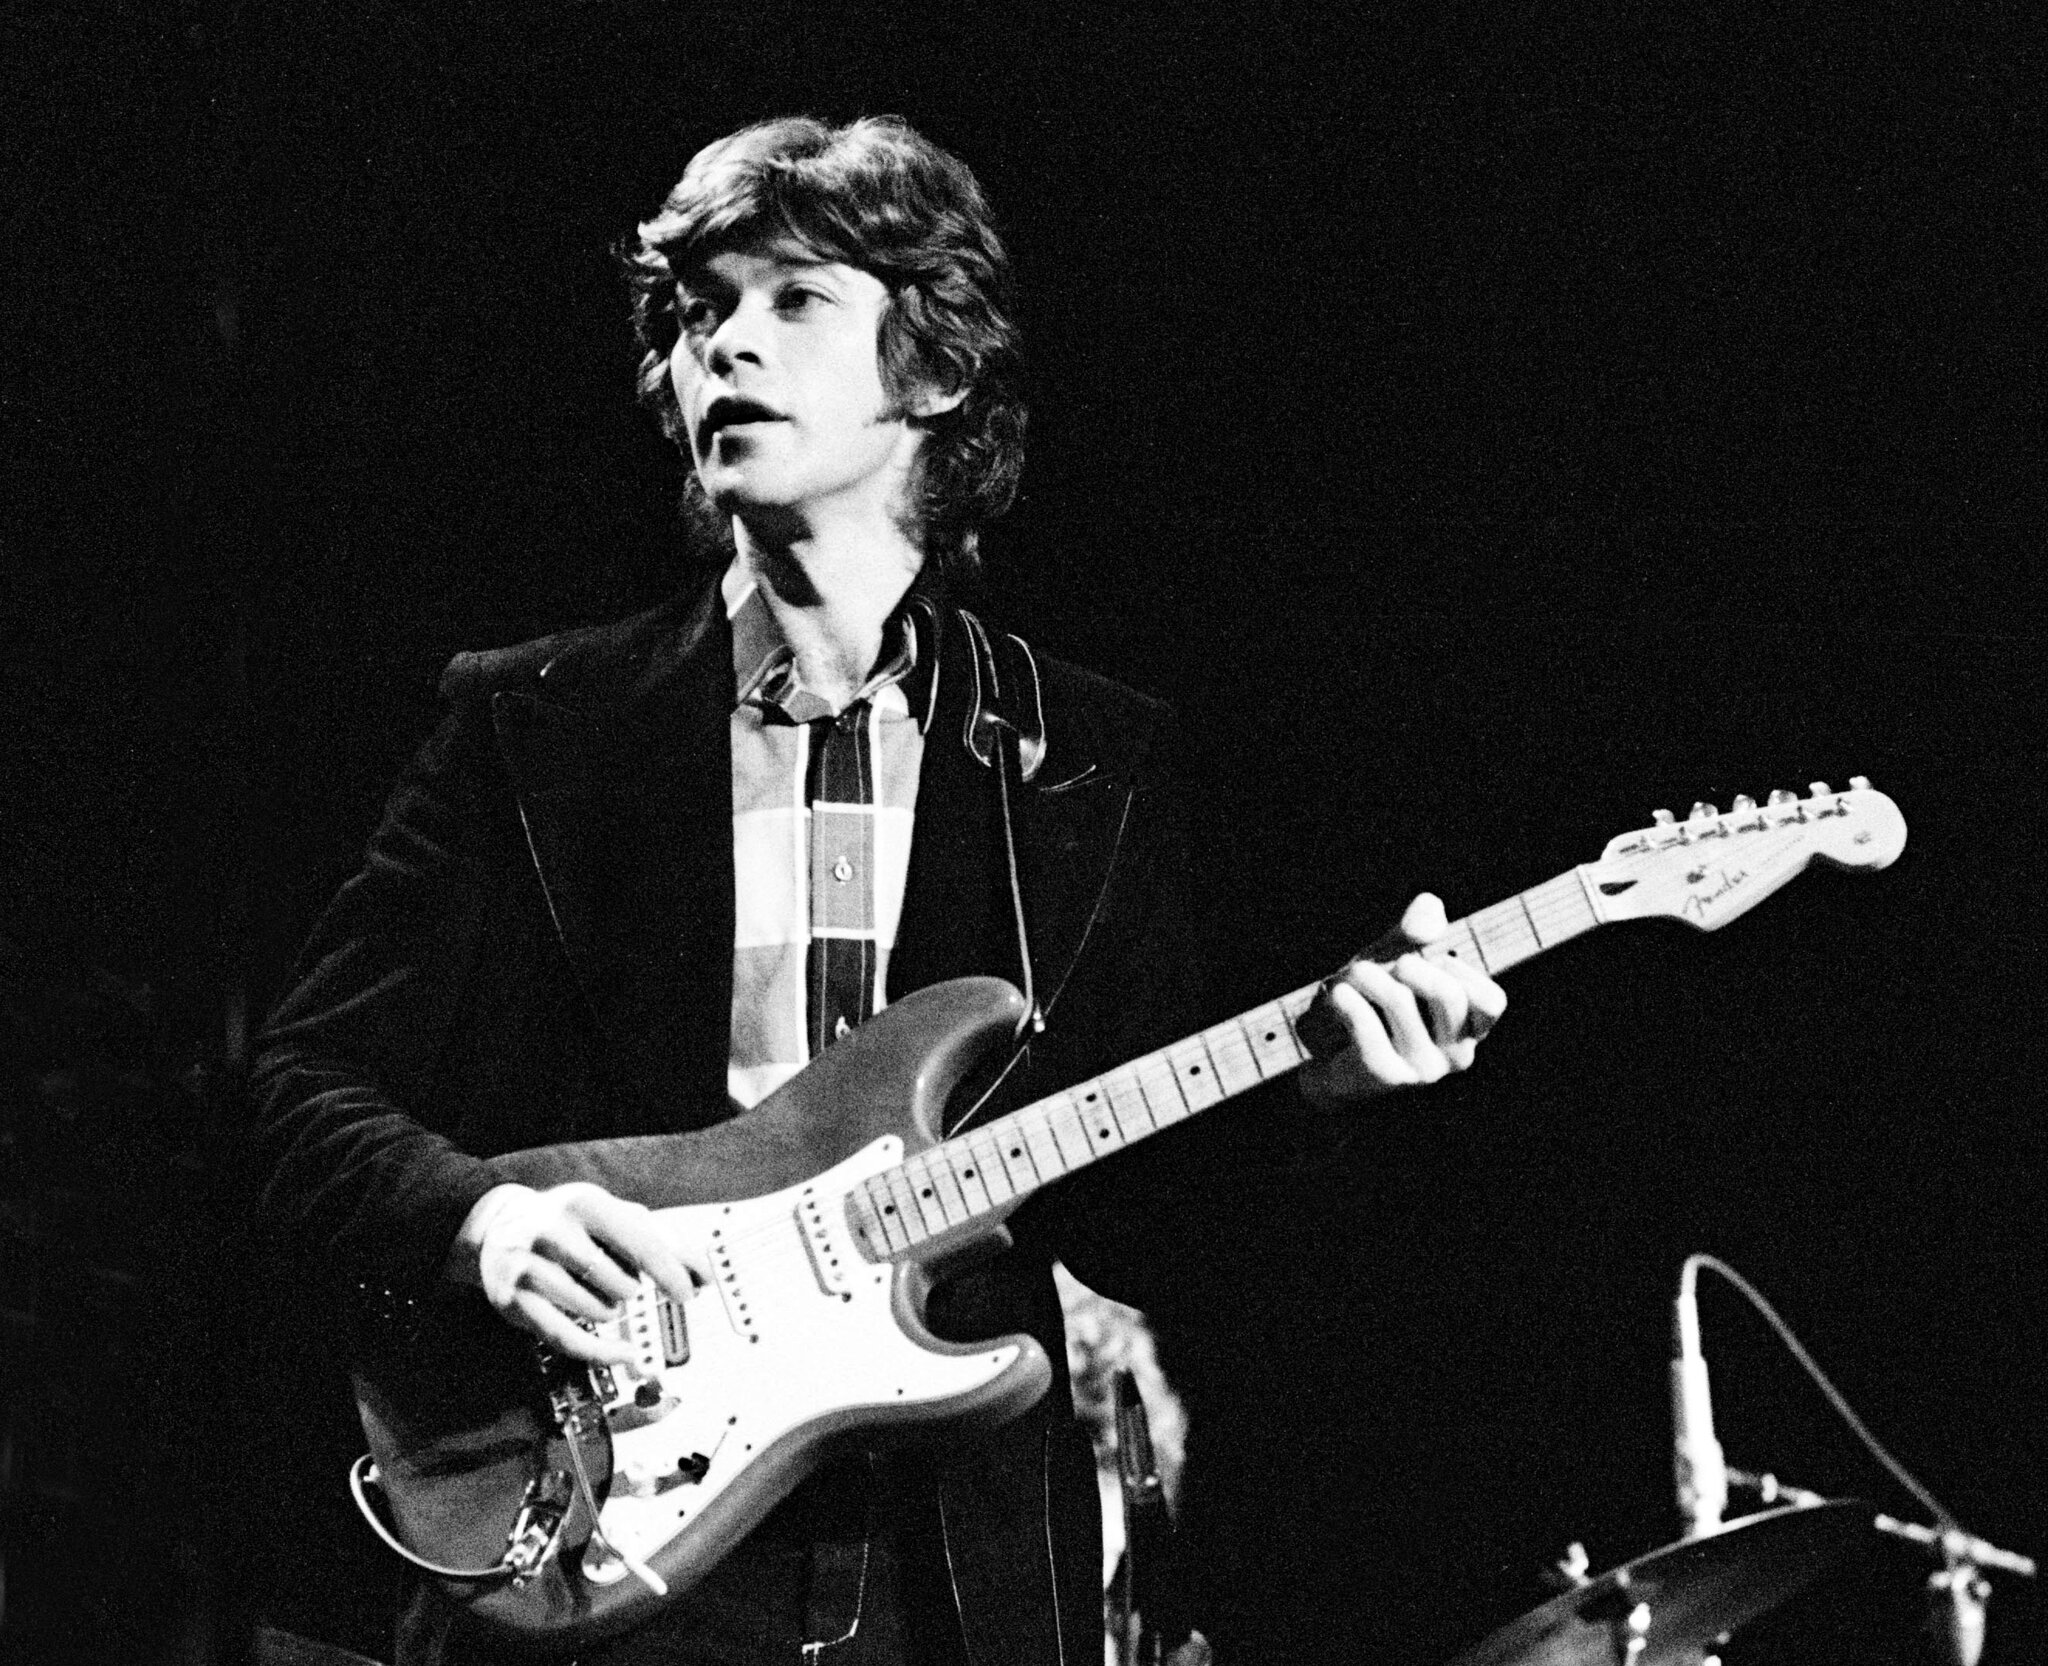 robbie robertson dead - A Sy 4